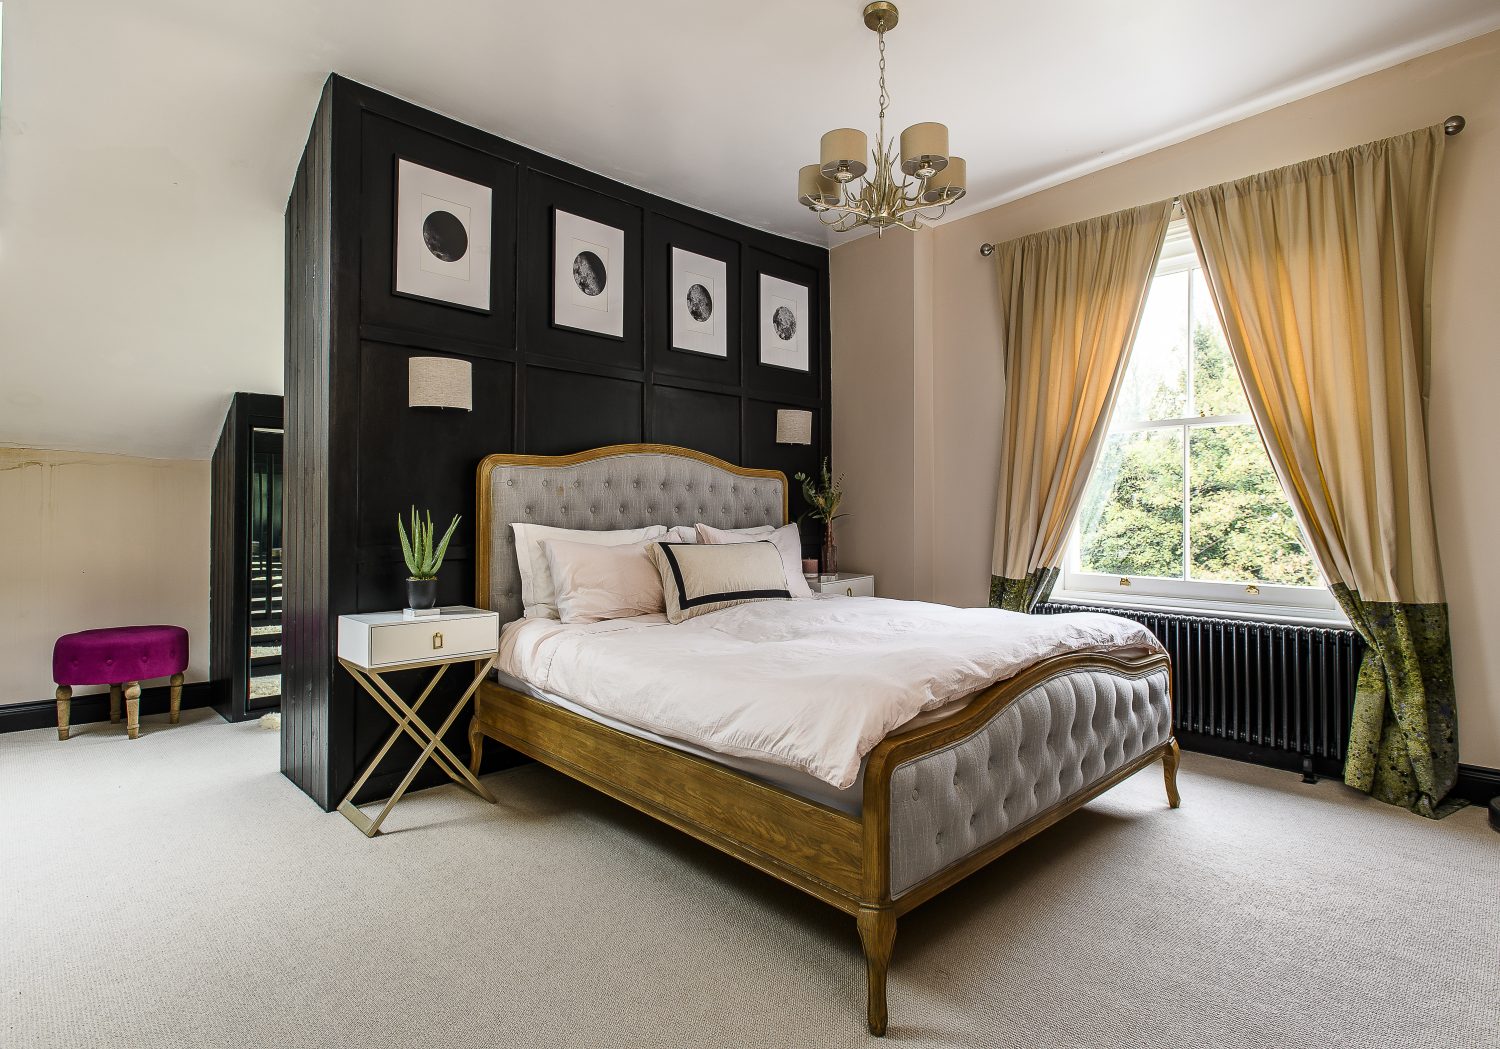 Three rooms were combined to create the master suite. A partition was put up behind the bed with mirrored wardrobe to make a dressing area with views over the back garden